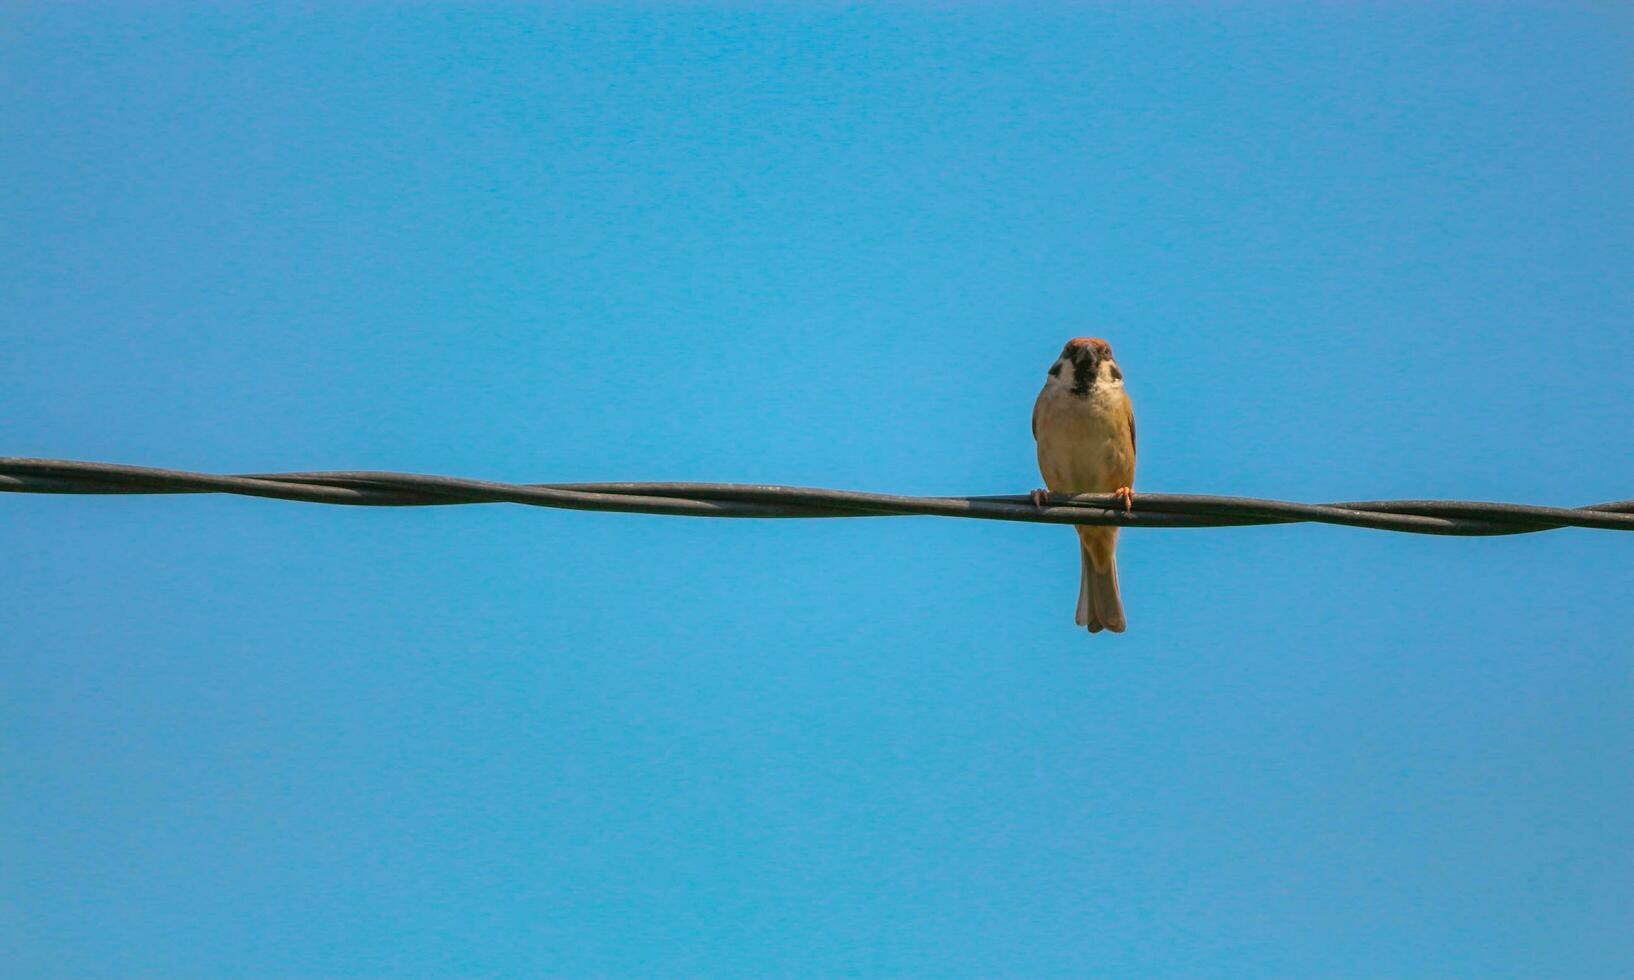 A beautiful sparrow is perched on an electric cable against the blue sky photo